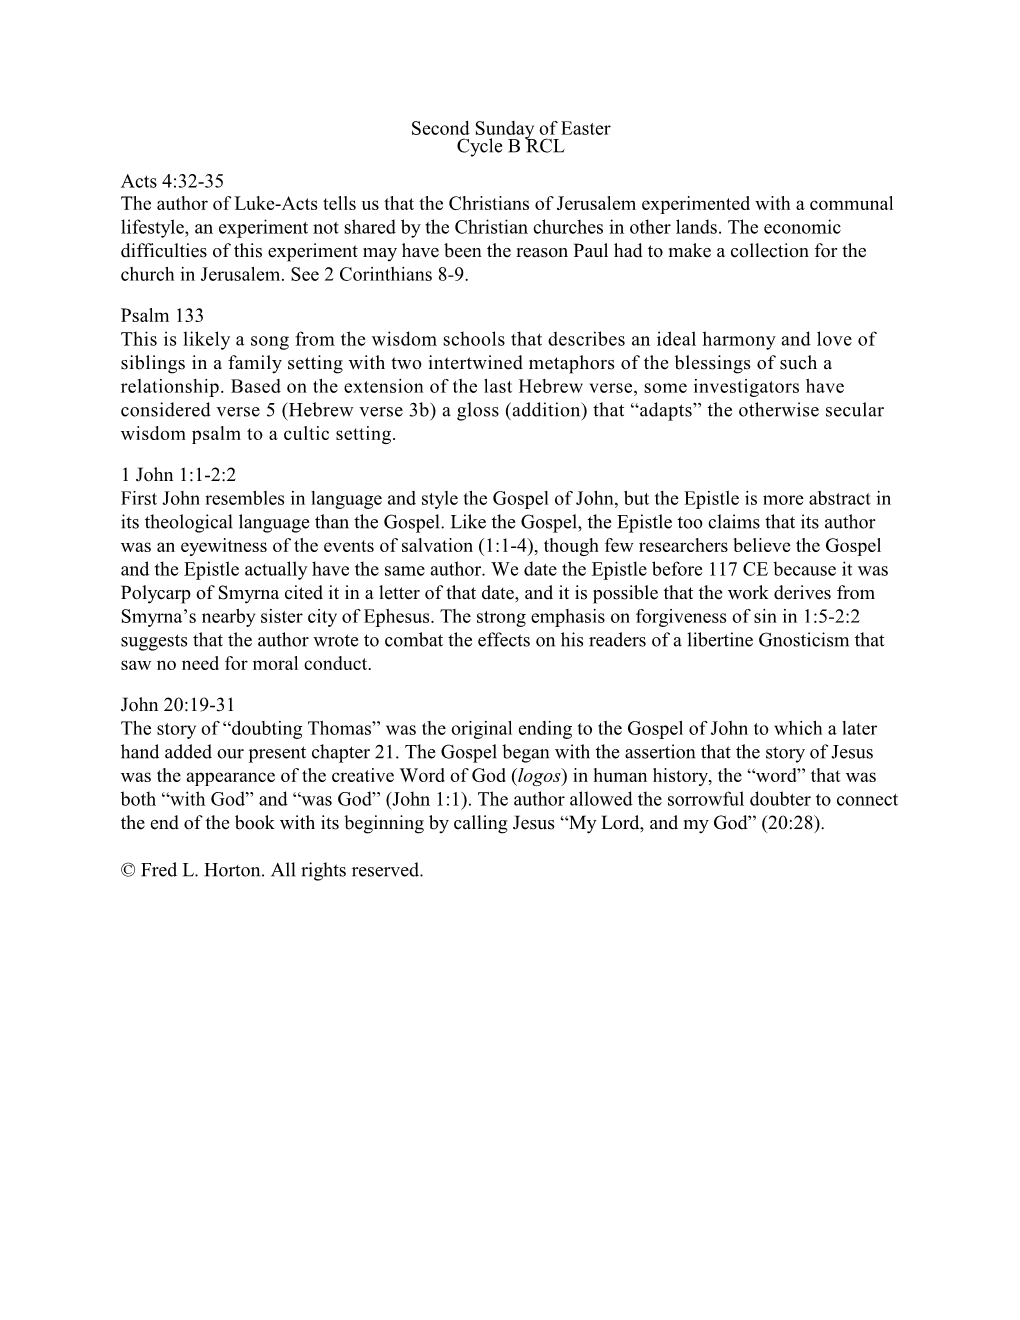 Second Sunday of Easter Cycle B RCL Acts 4:32-35 the Author Of